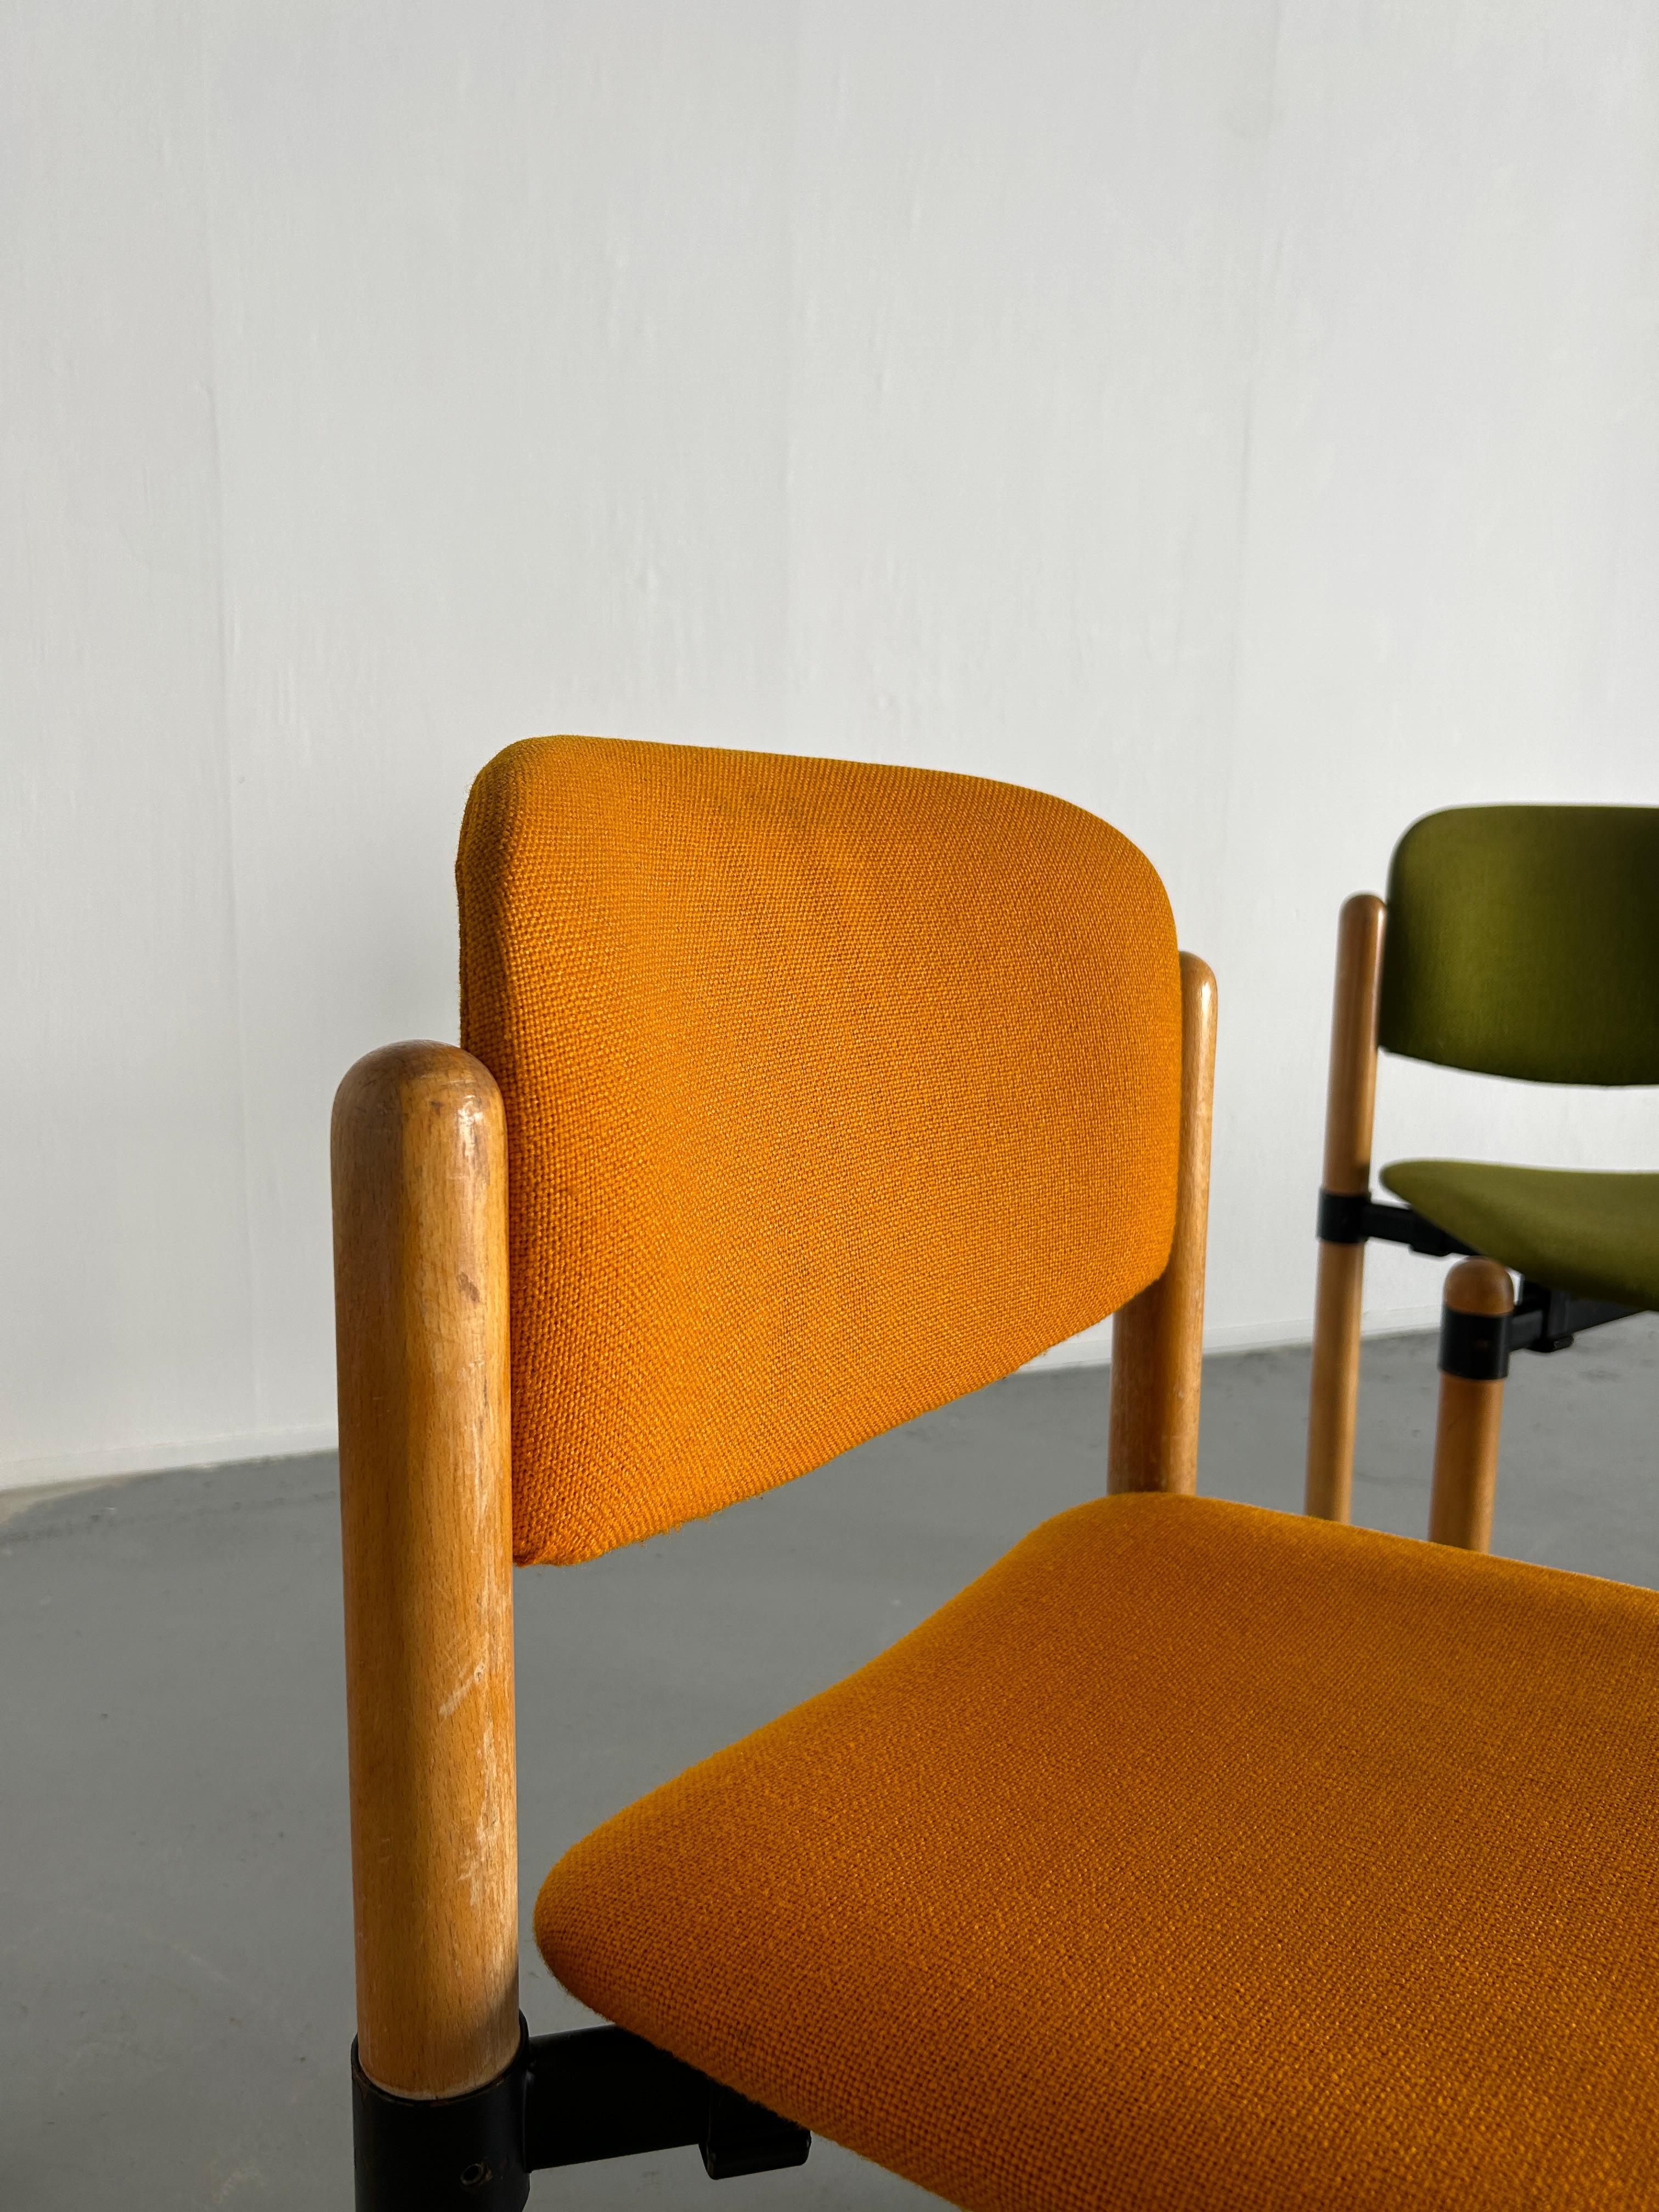 1/10 Mid Century Modern Stackable Dining Chairs by Fröscher Sitform, 70s Germany 2